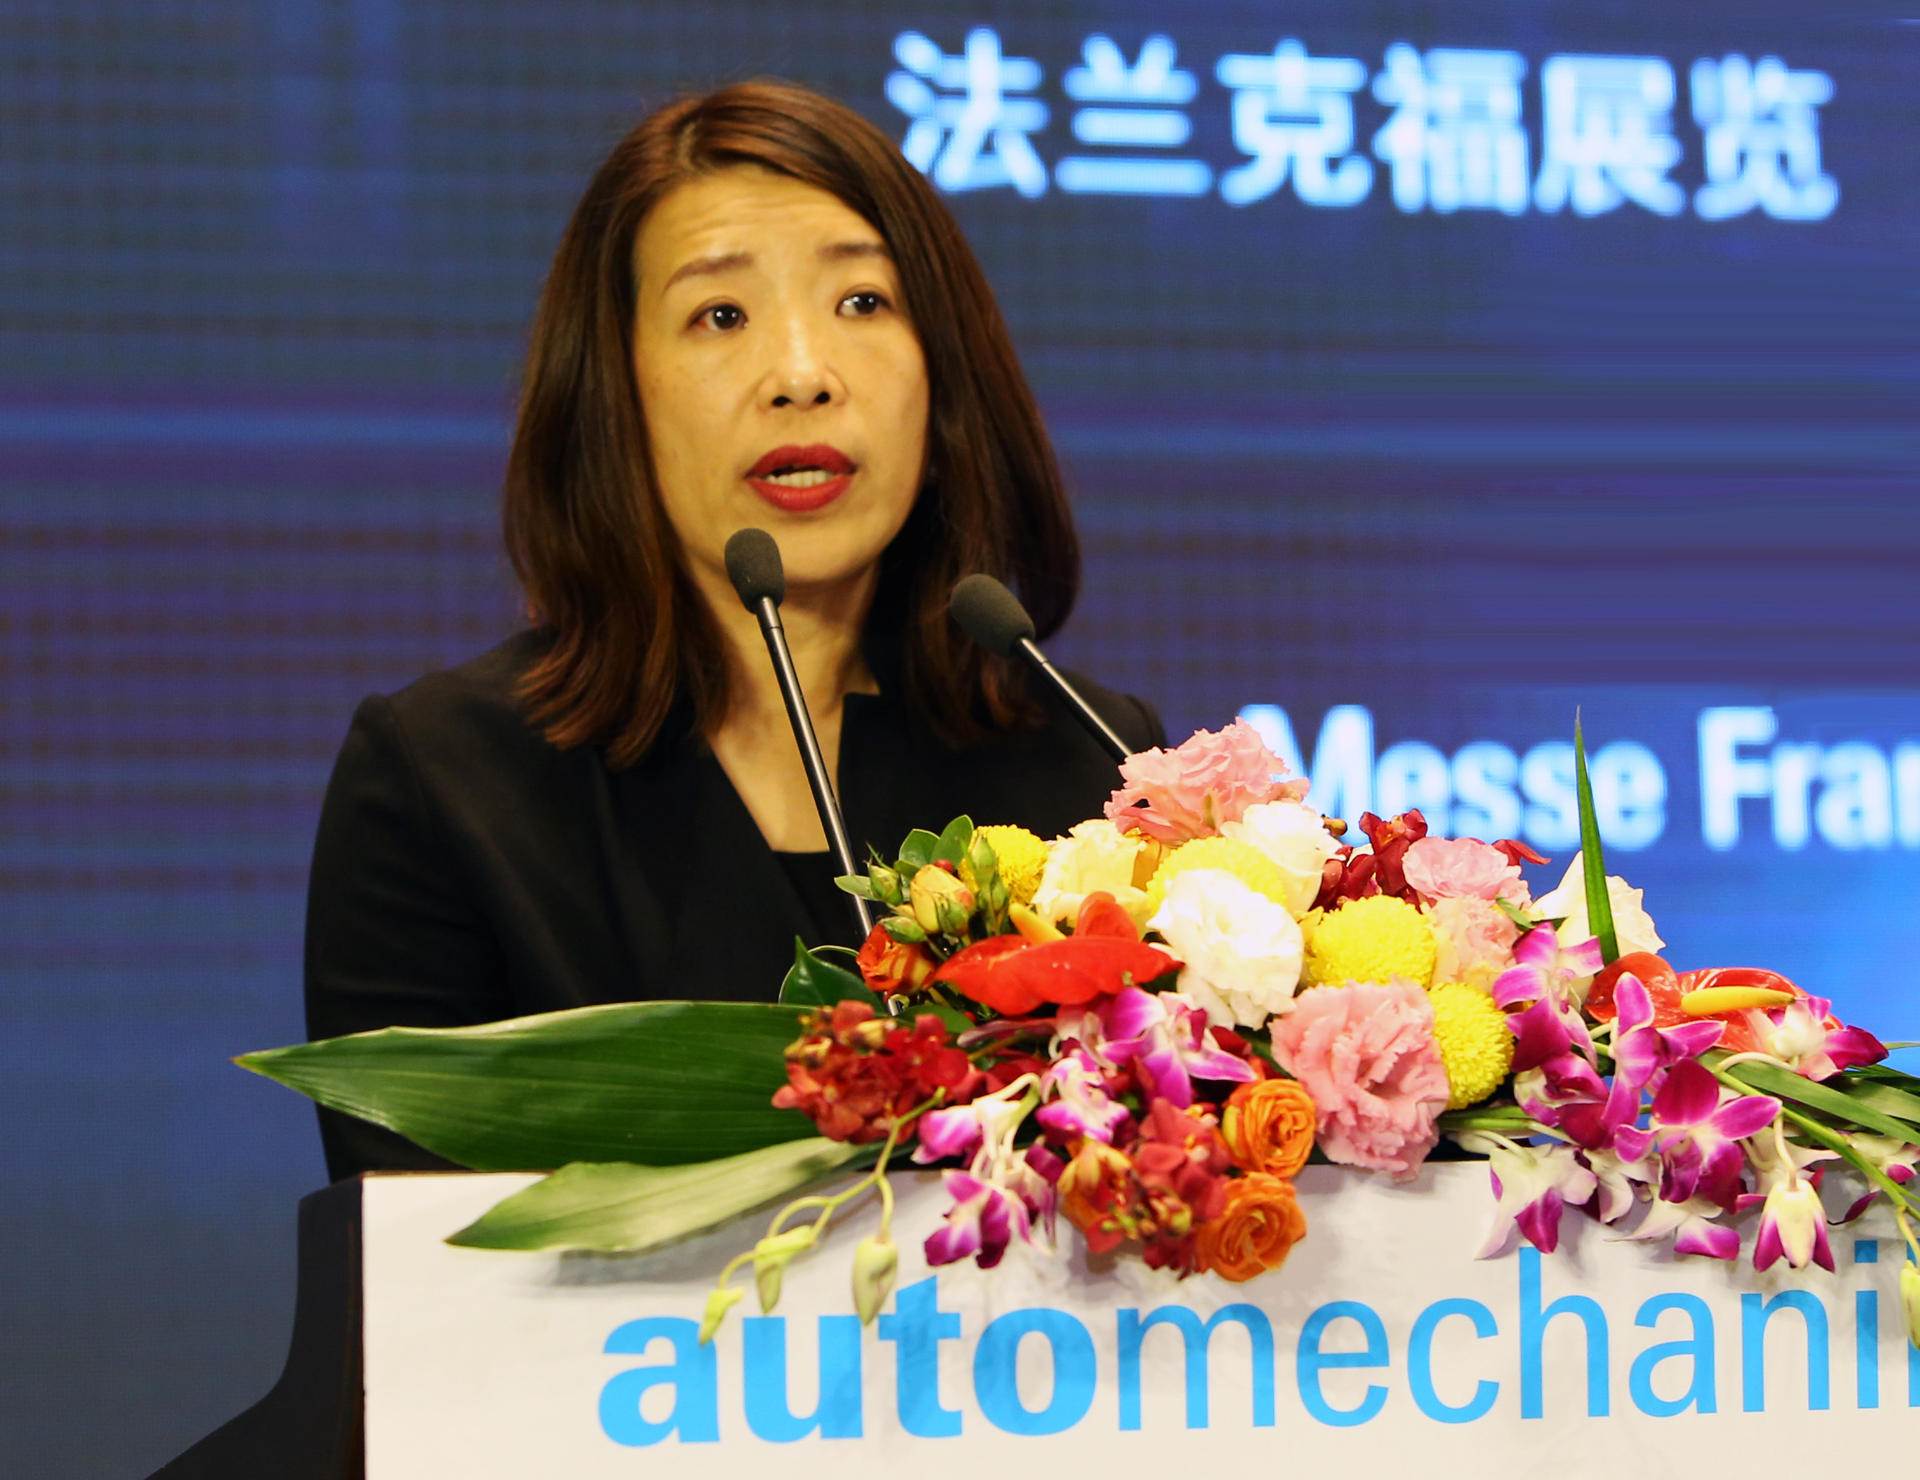 Automechanika Ho Chi Minh City 2021 Rescheduled To 2022 - Fiona Chiew